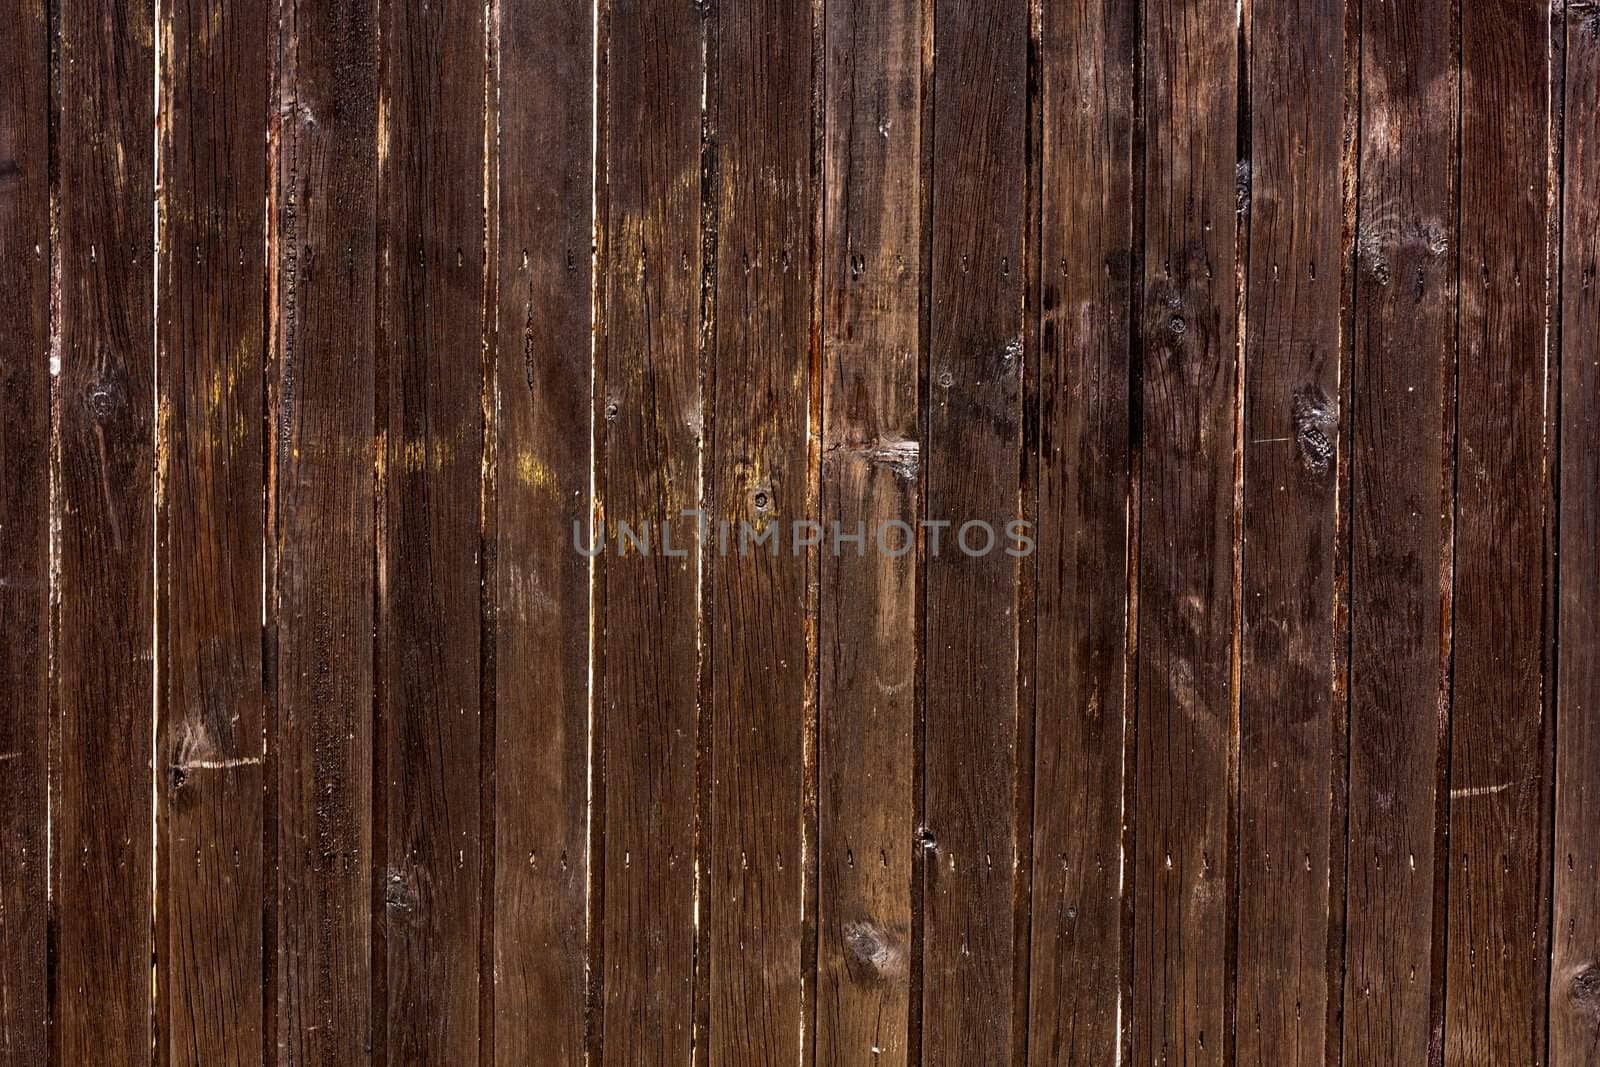 Close up view of a wooden wall texture.